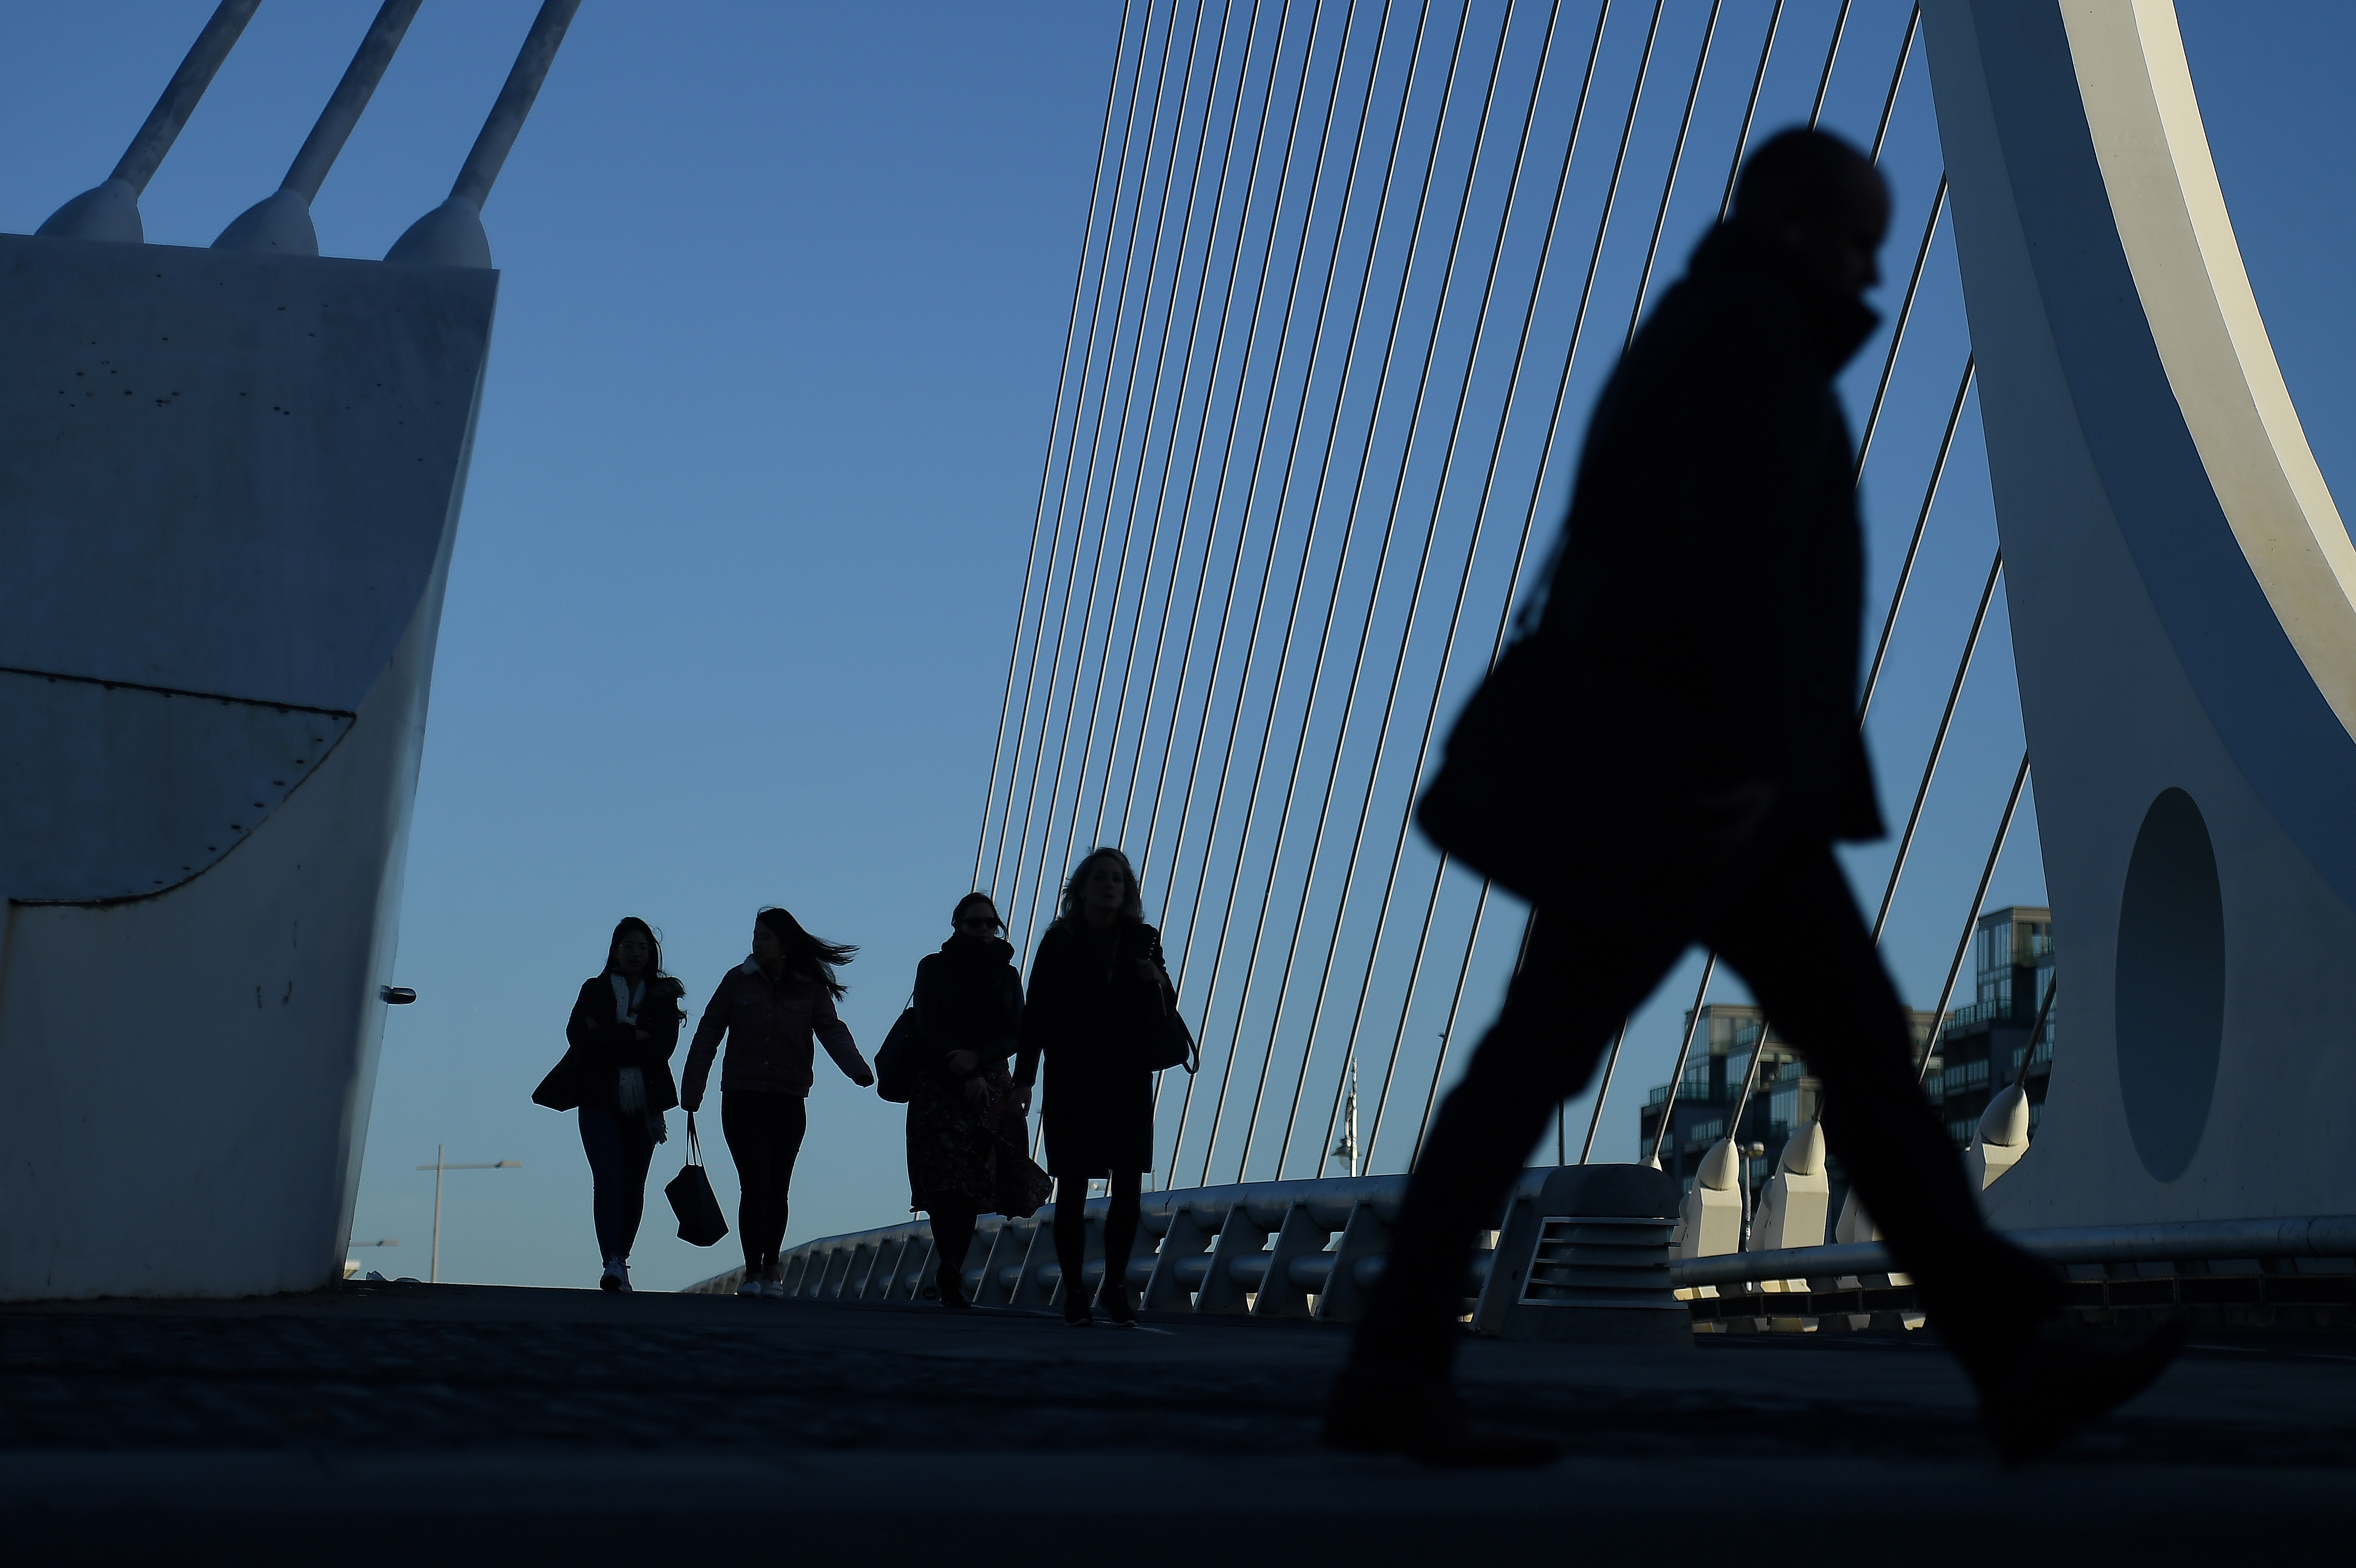 Commuters make their way into work in the morning in the financial district of Dublin